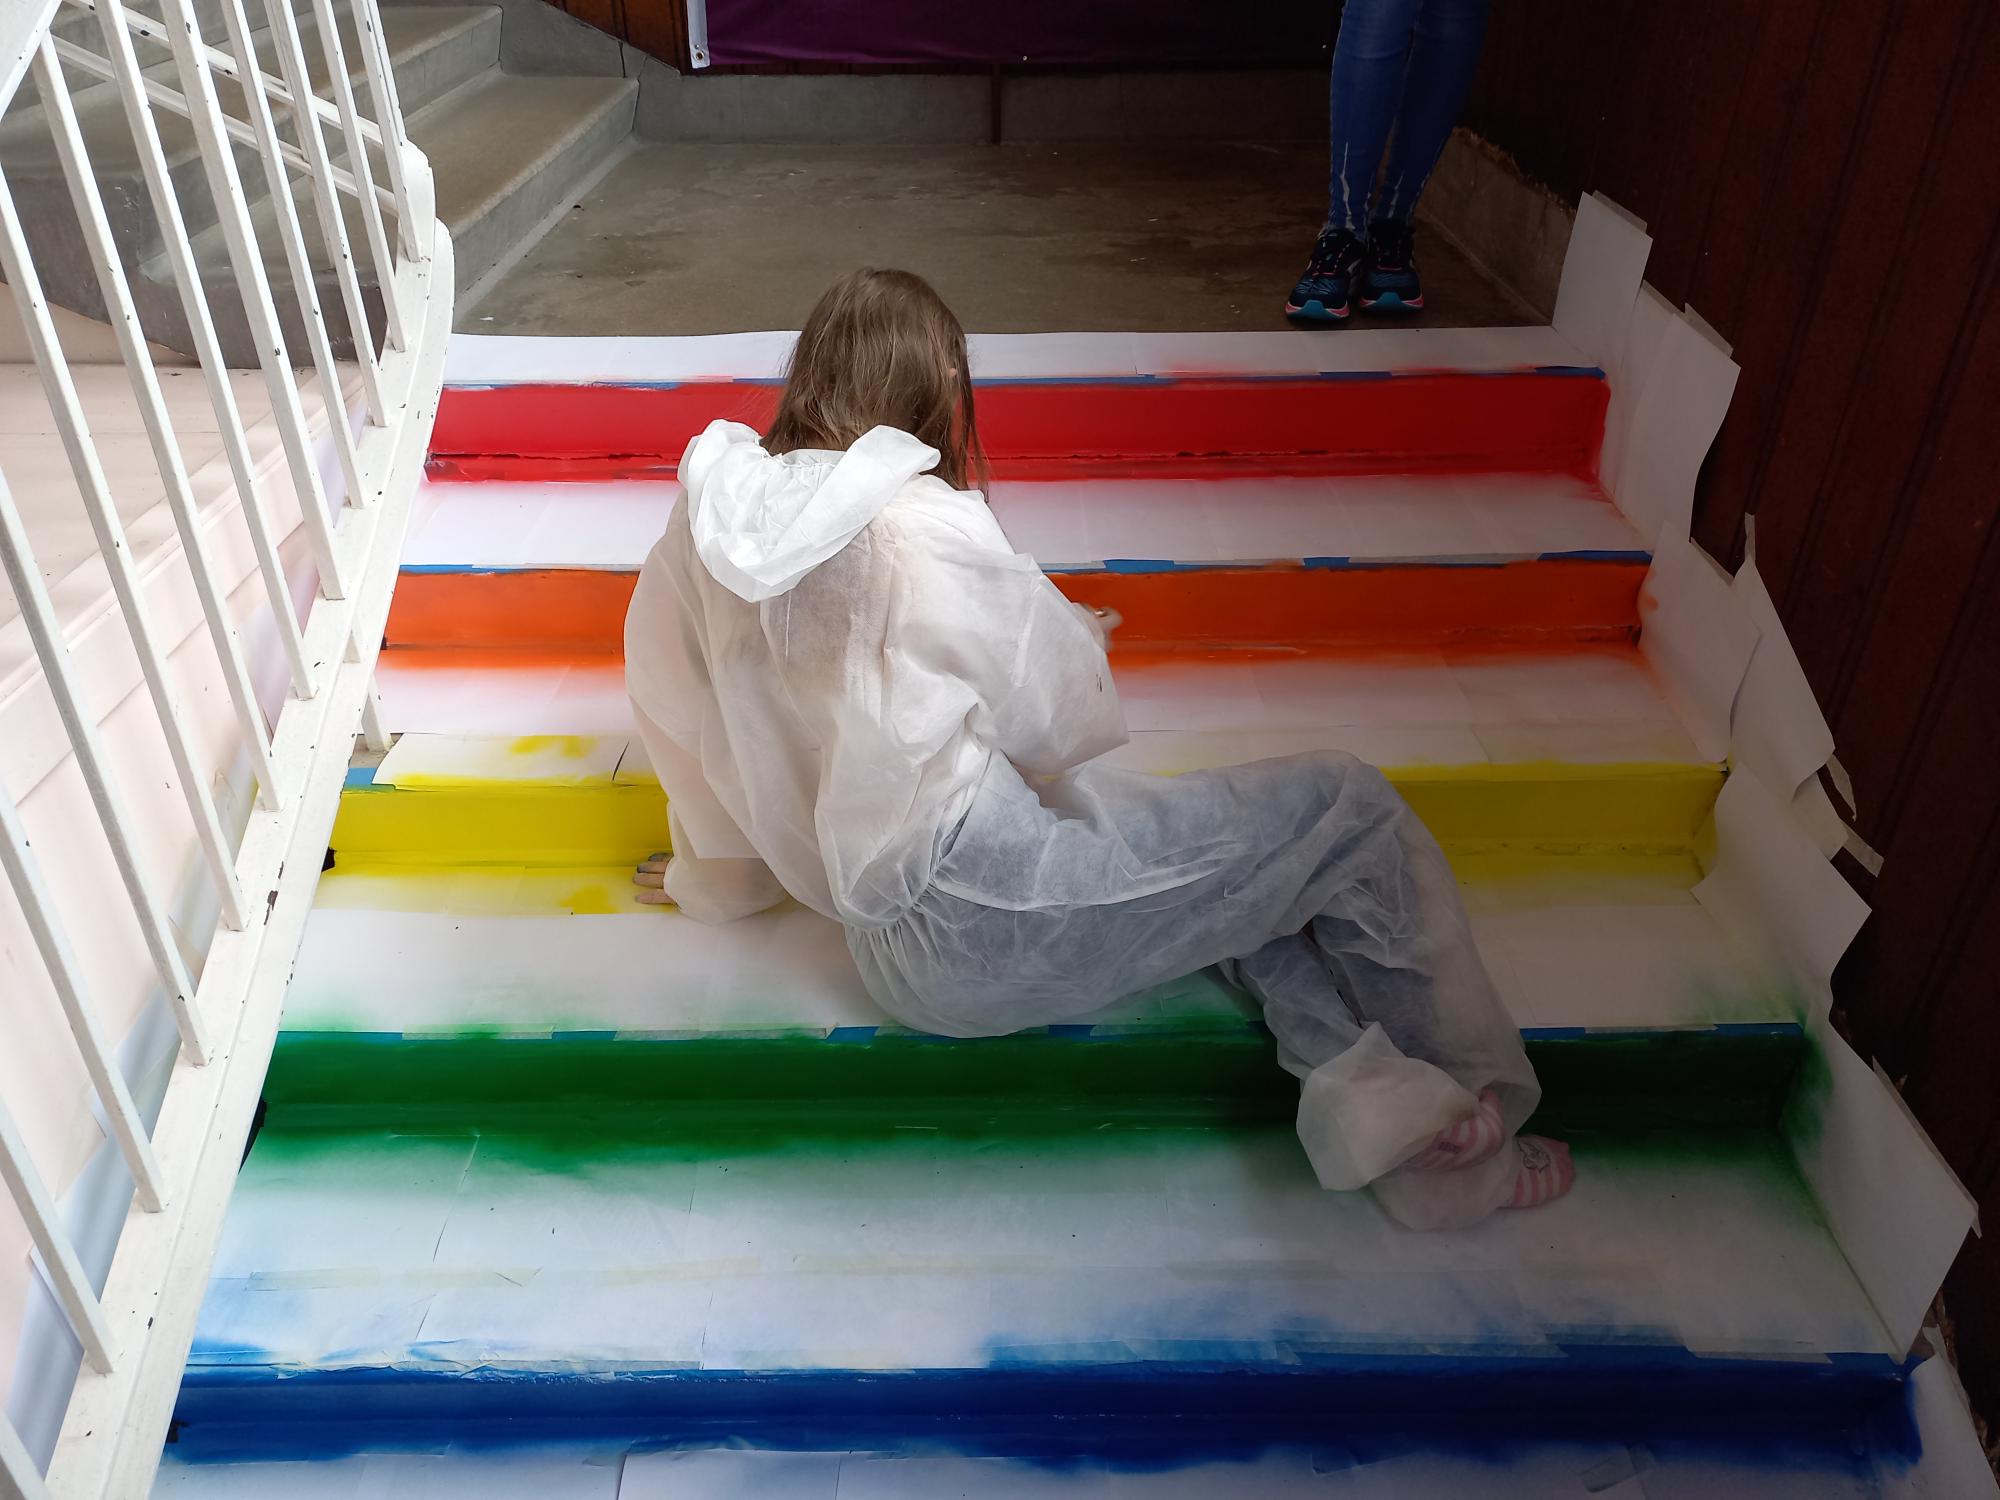 Zoe at work painting the stairs with the colours of the pride flag